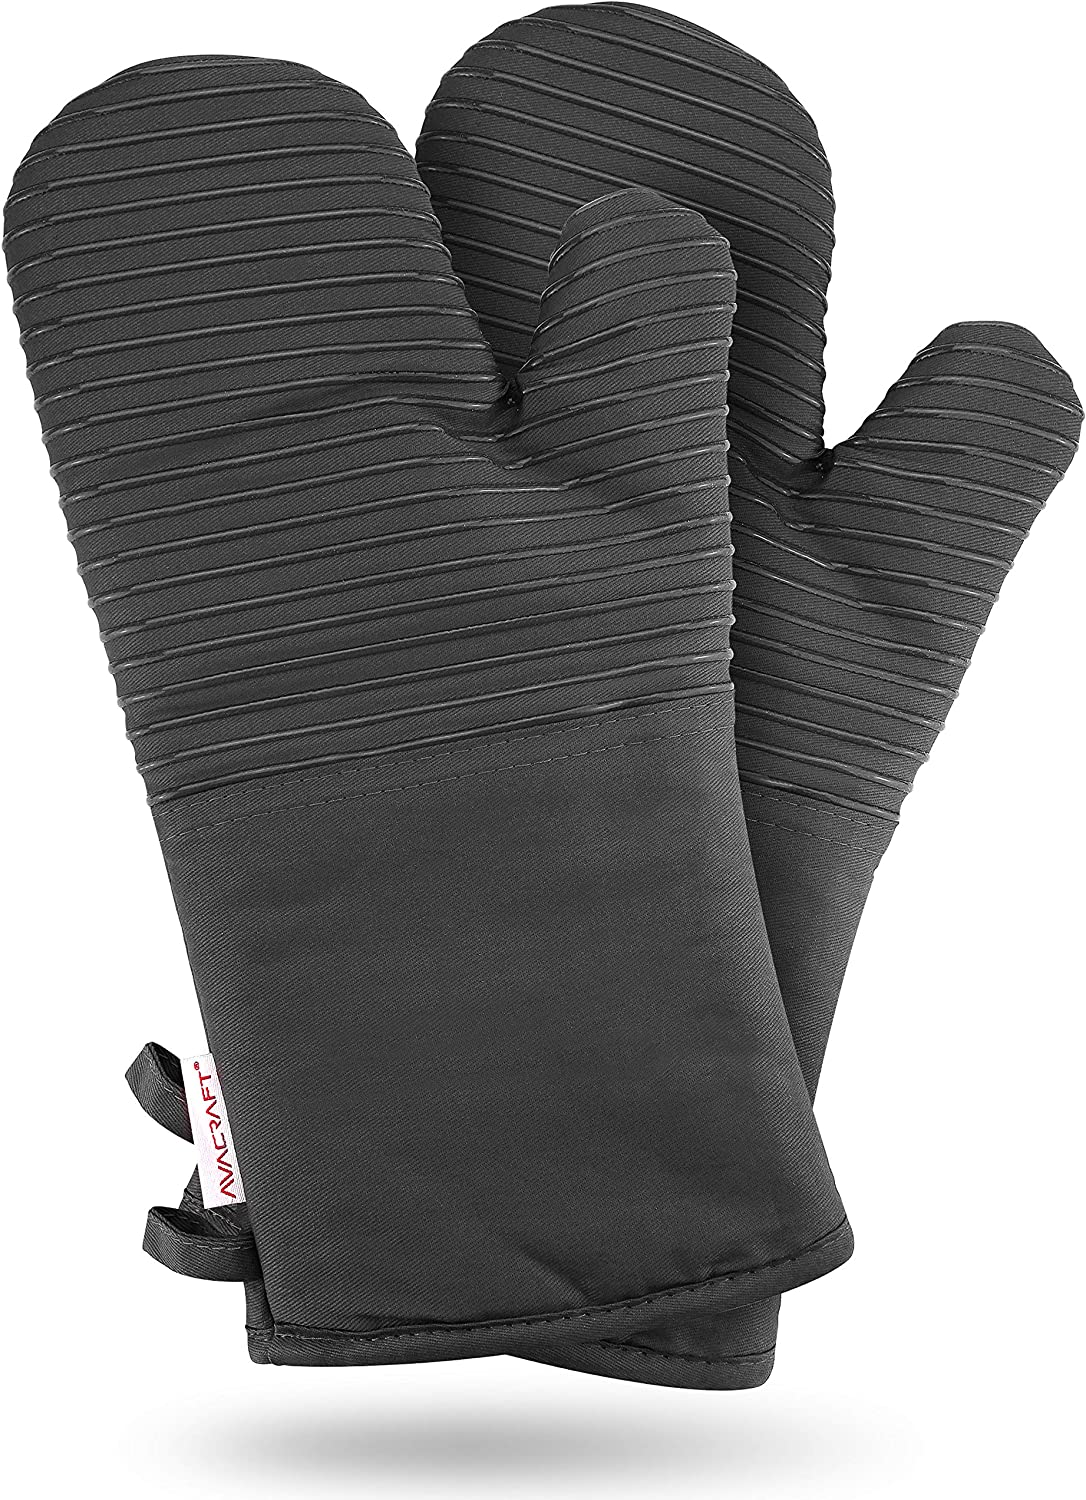 avacraft oven mitts pair, flexible,